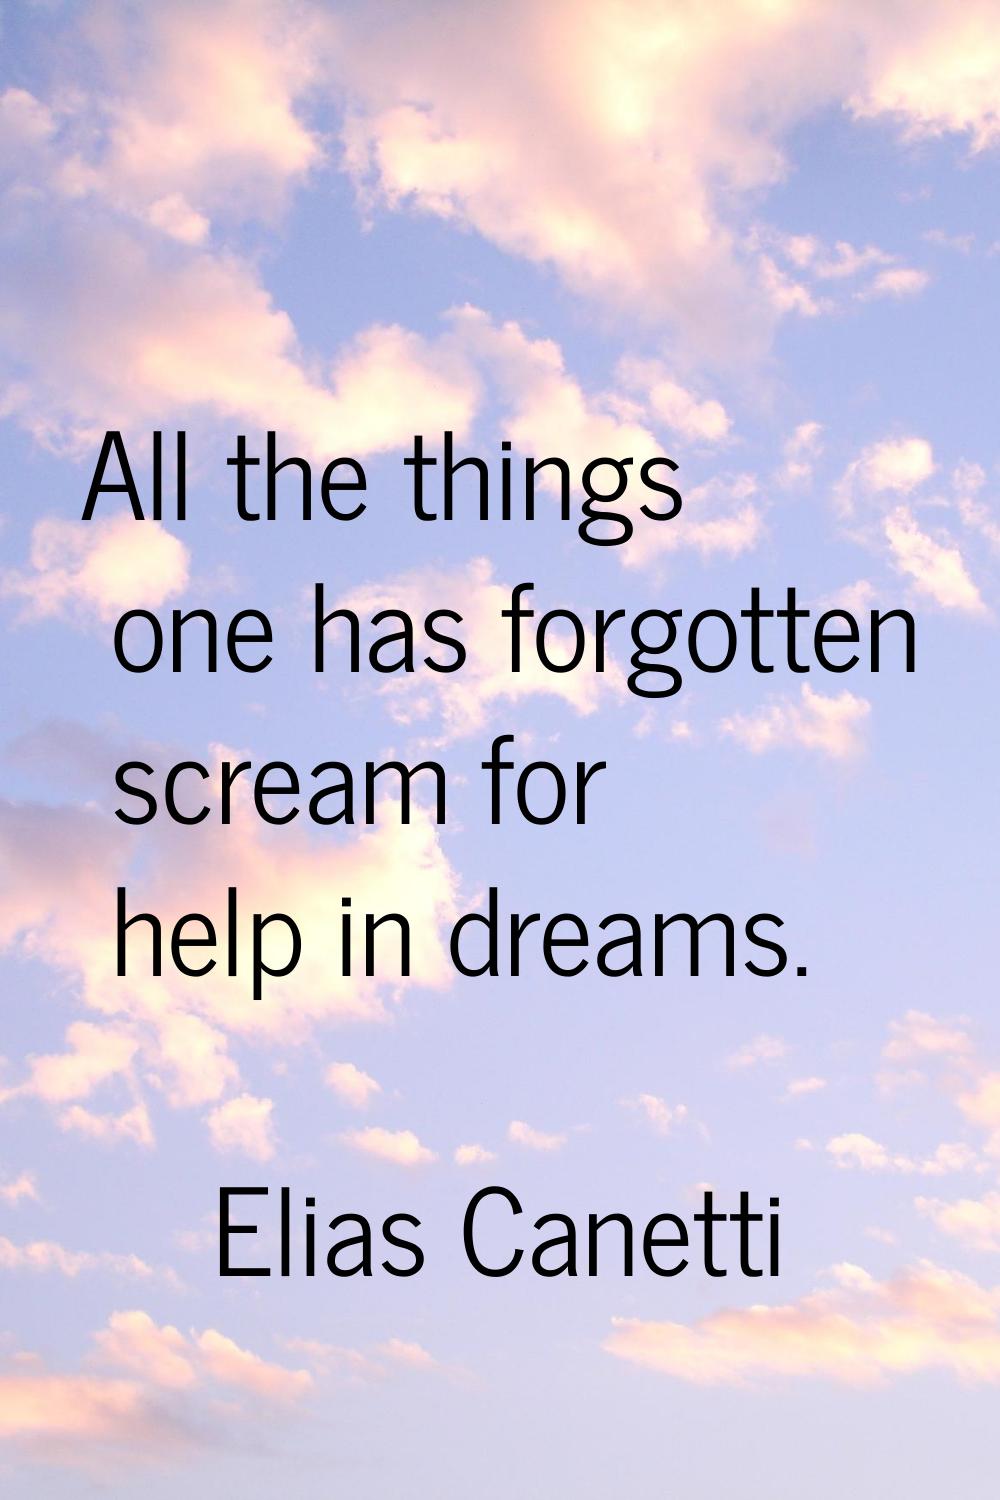 All the things one has forgotten scream for help in dreams.